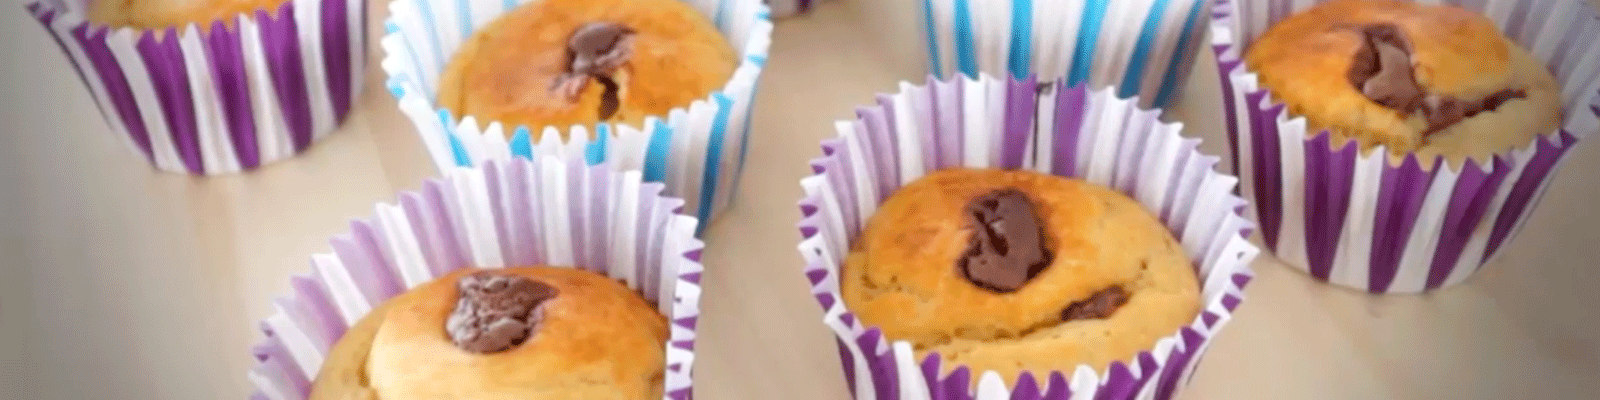 Muffins Proteicos con Chocolate